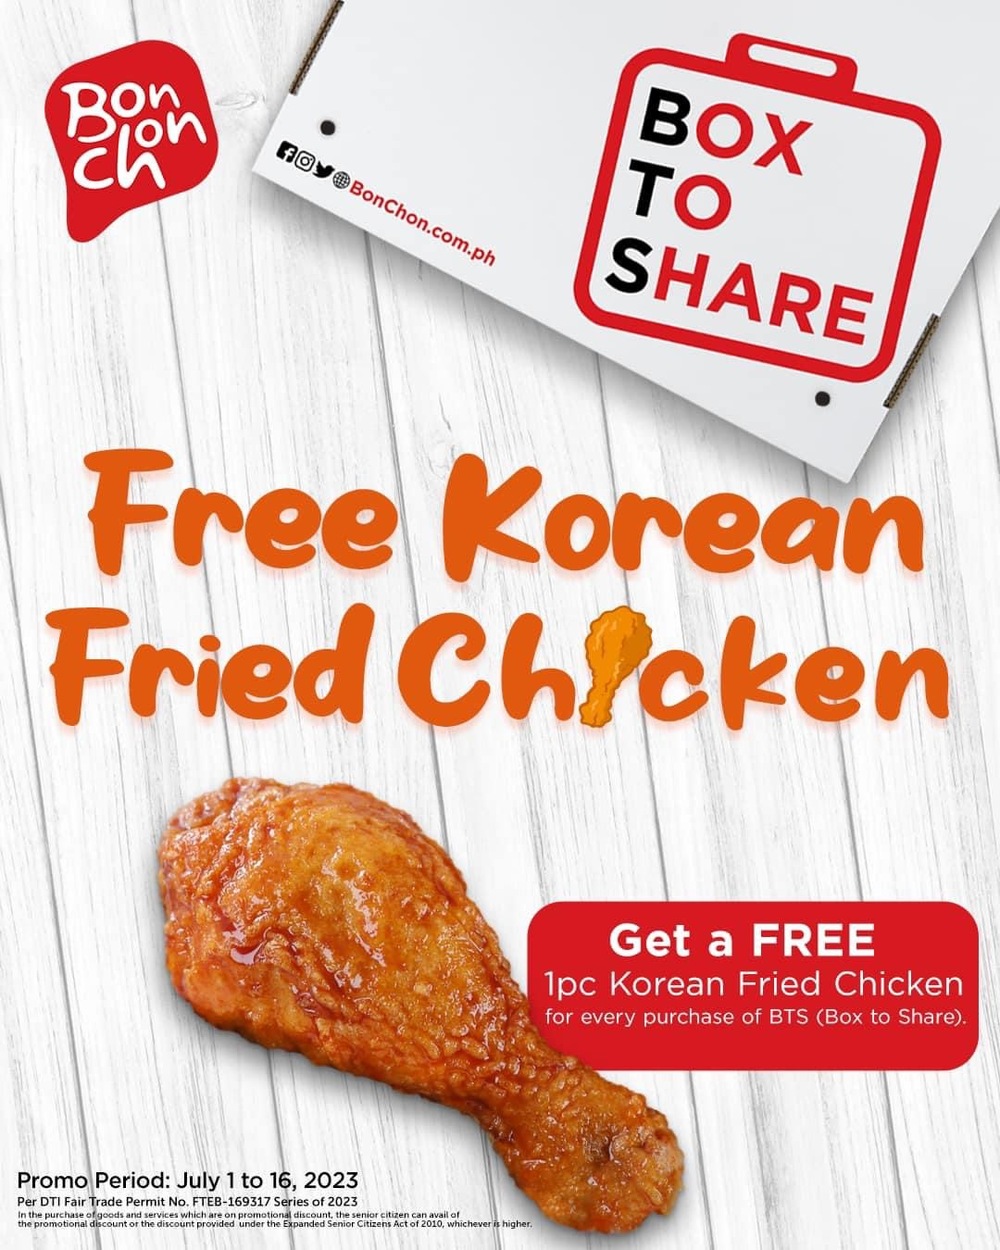 Awesome chicken deals and promos this National Fried Chicken Day 2023 from Bonchon Chicken Philippines